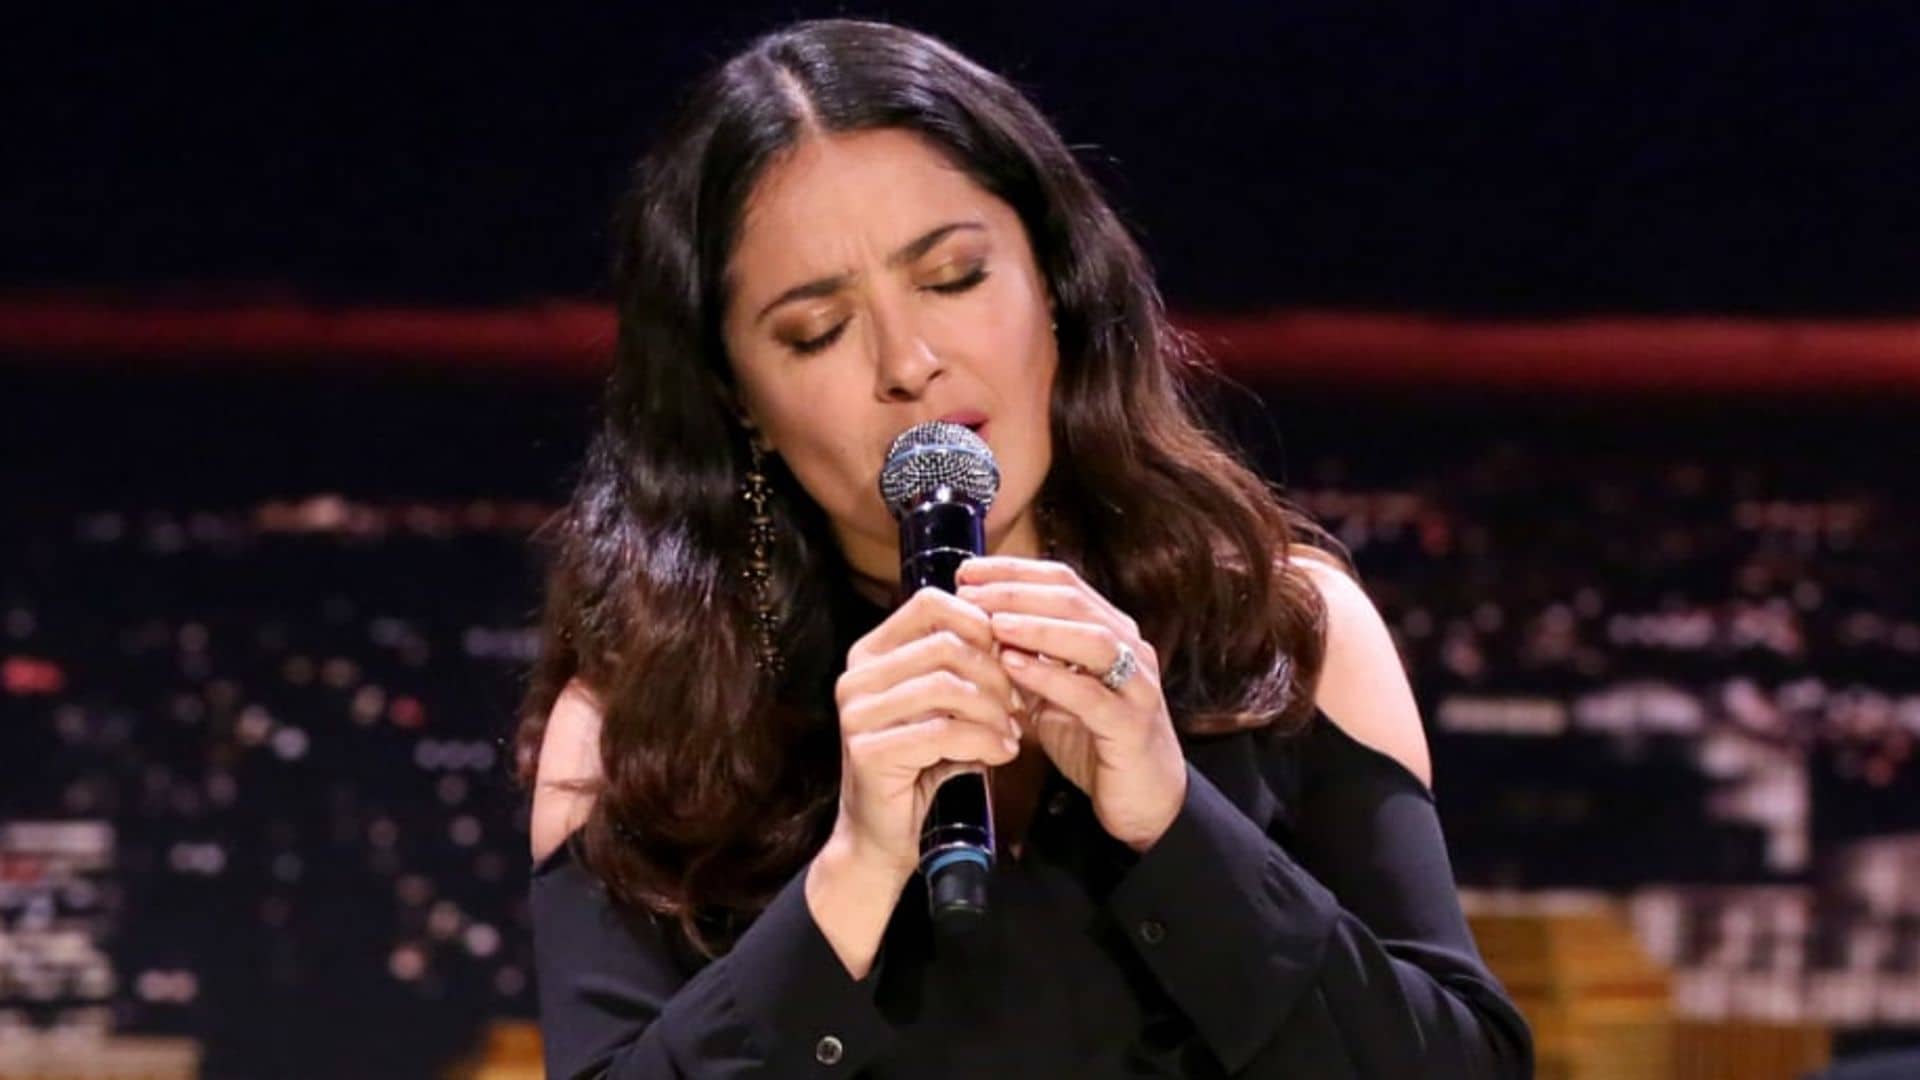 It's Salma Hayek's birthday and she'll cry if she wants to: Hear her amazing voice!